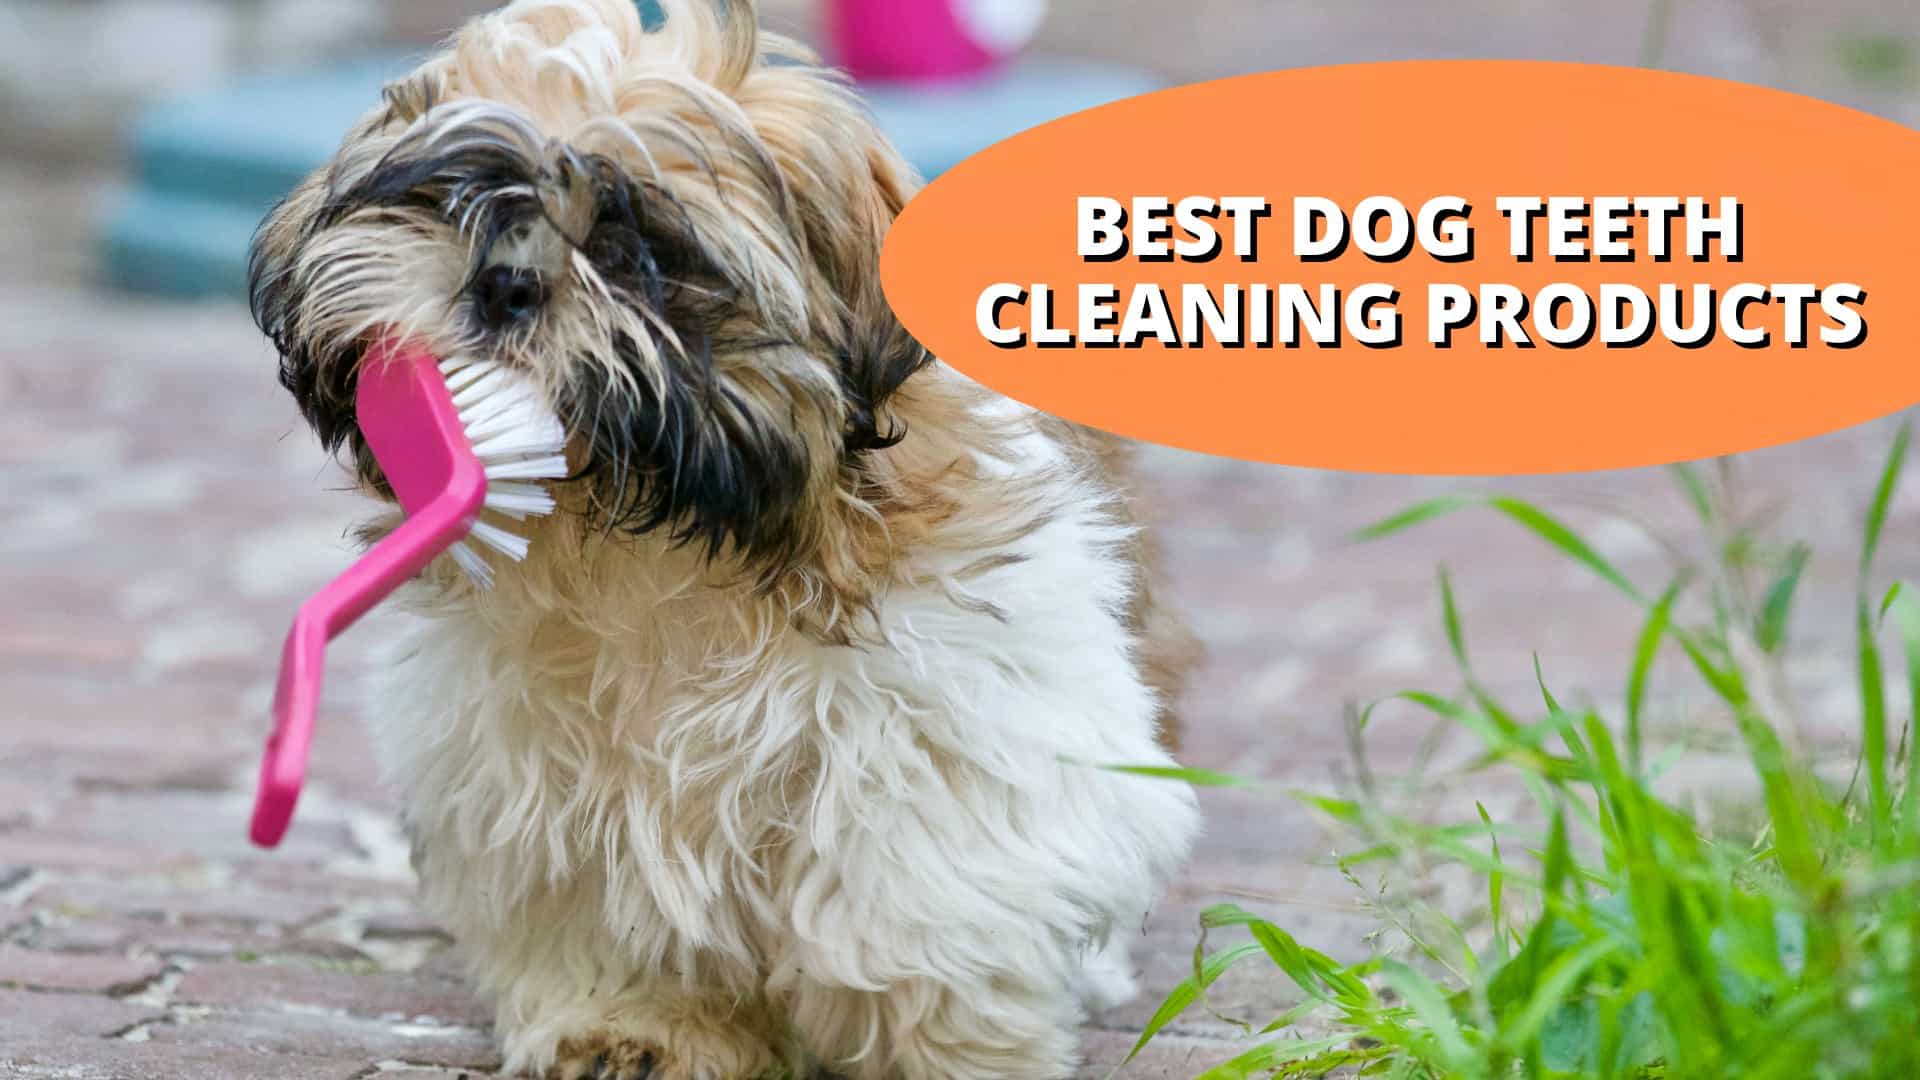 Top 17 Teeth Cleaning Products for Dogs | Best Oral Health